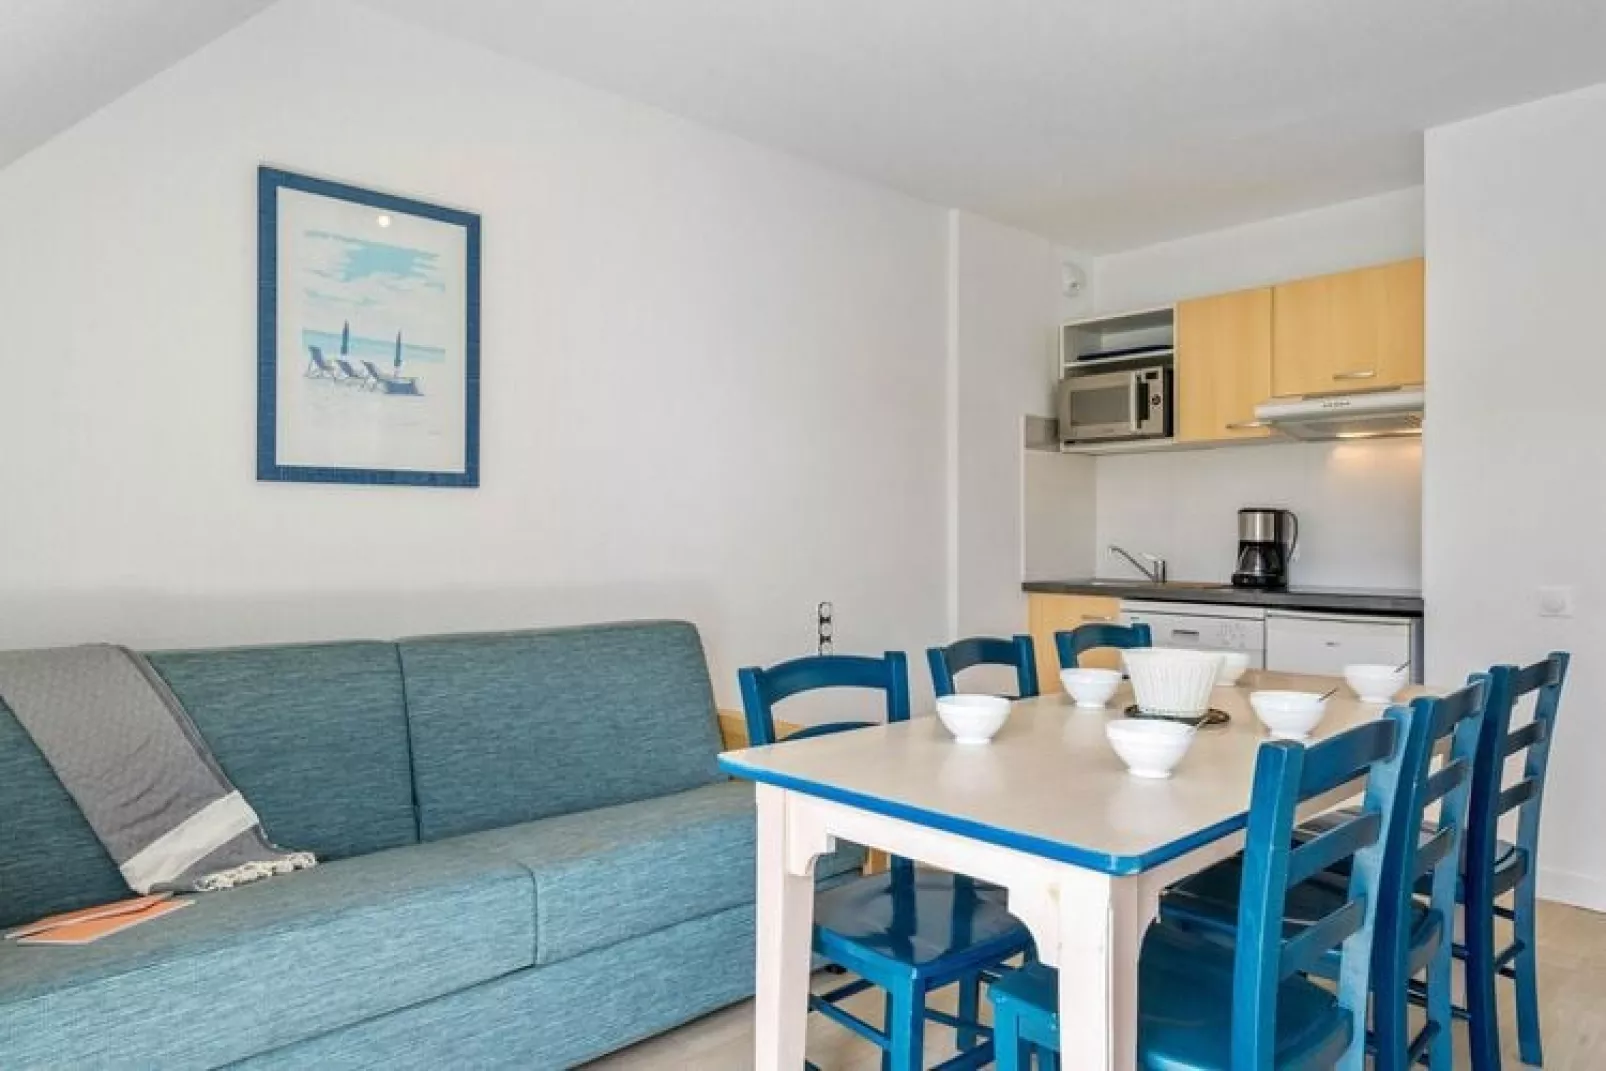 Residence La Voile d'Or L'Ile-aux-Moines  -  OVO26 -App Standard 6 p - Terr ou balcon - Apt 5 pers - 1 chambre-Woonkamer